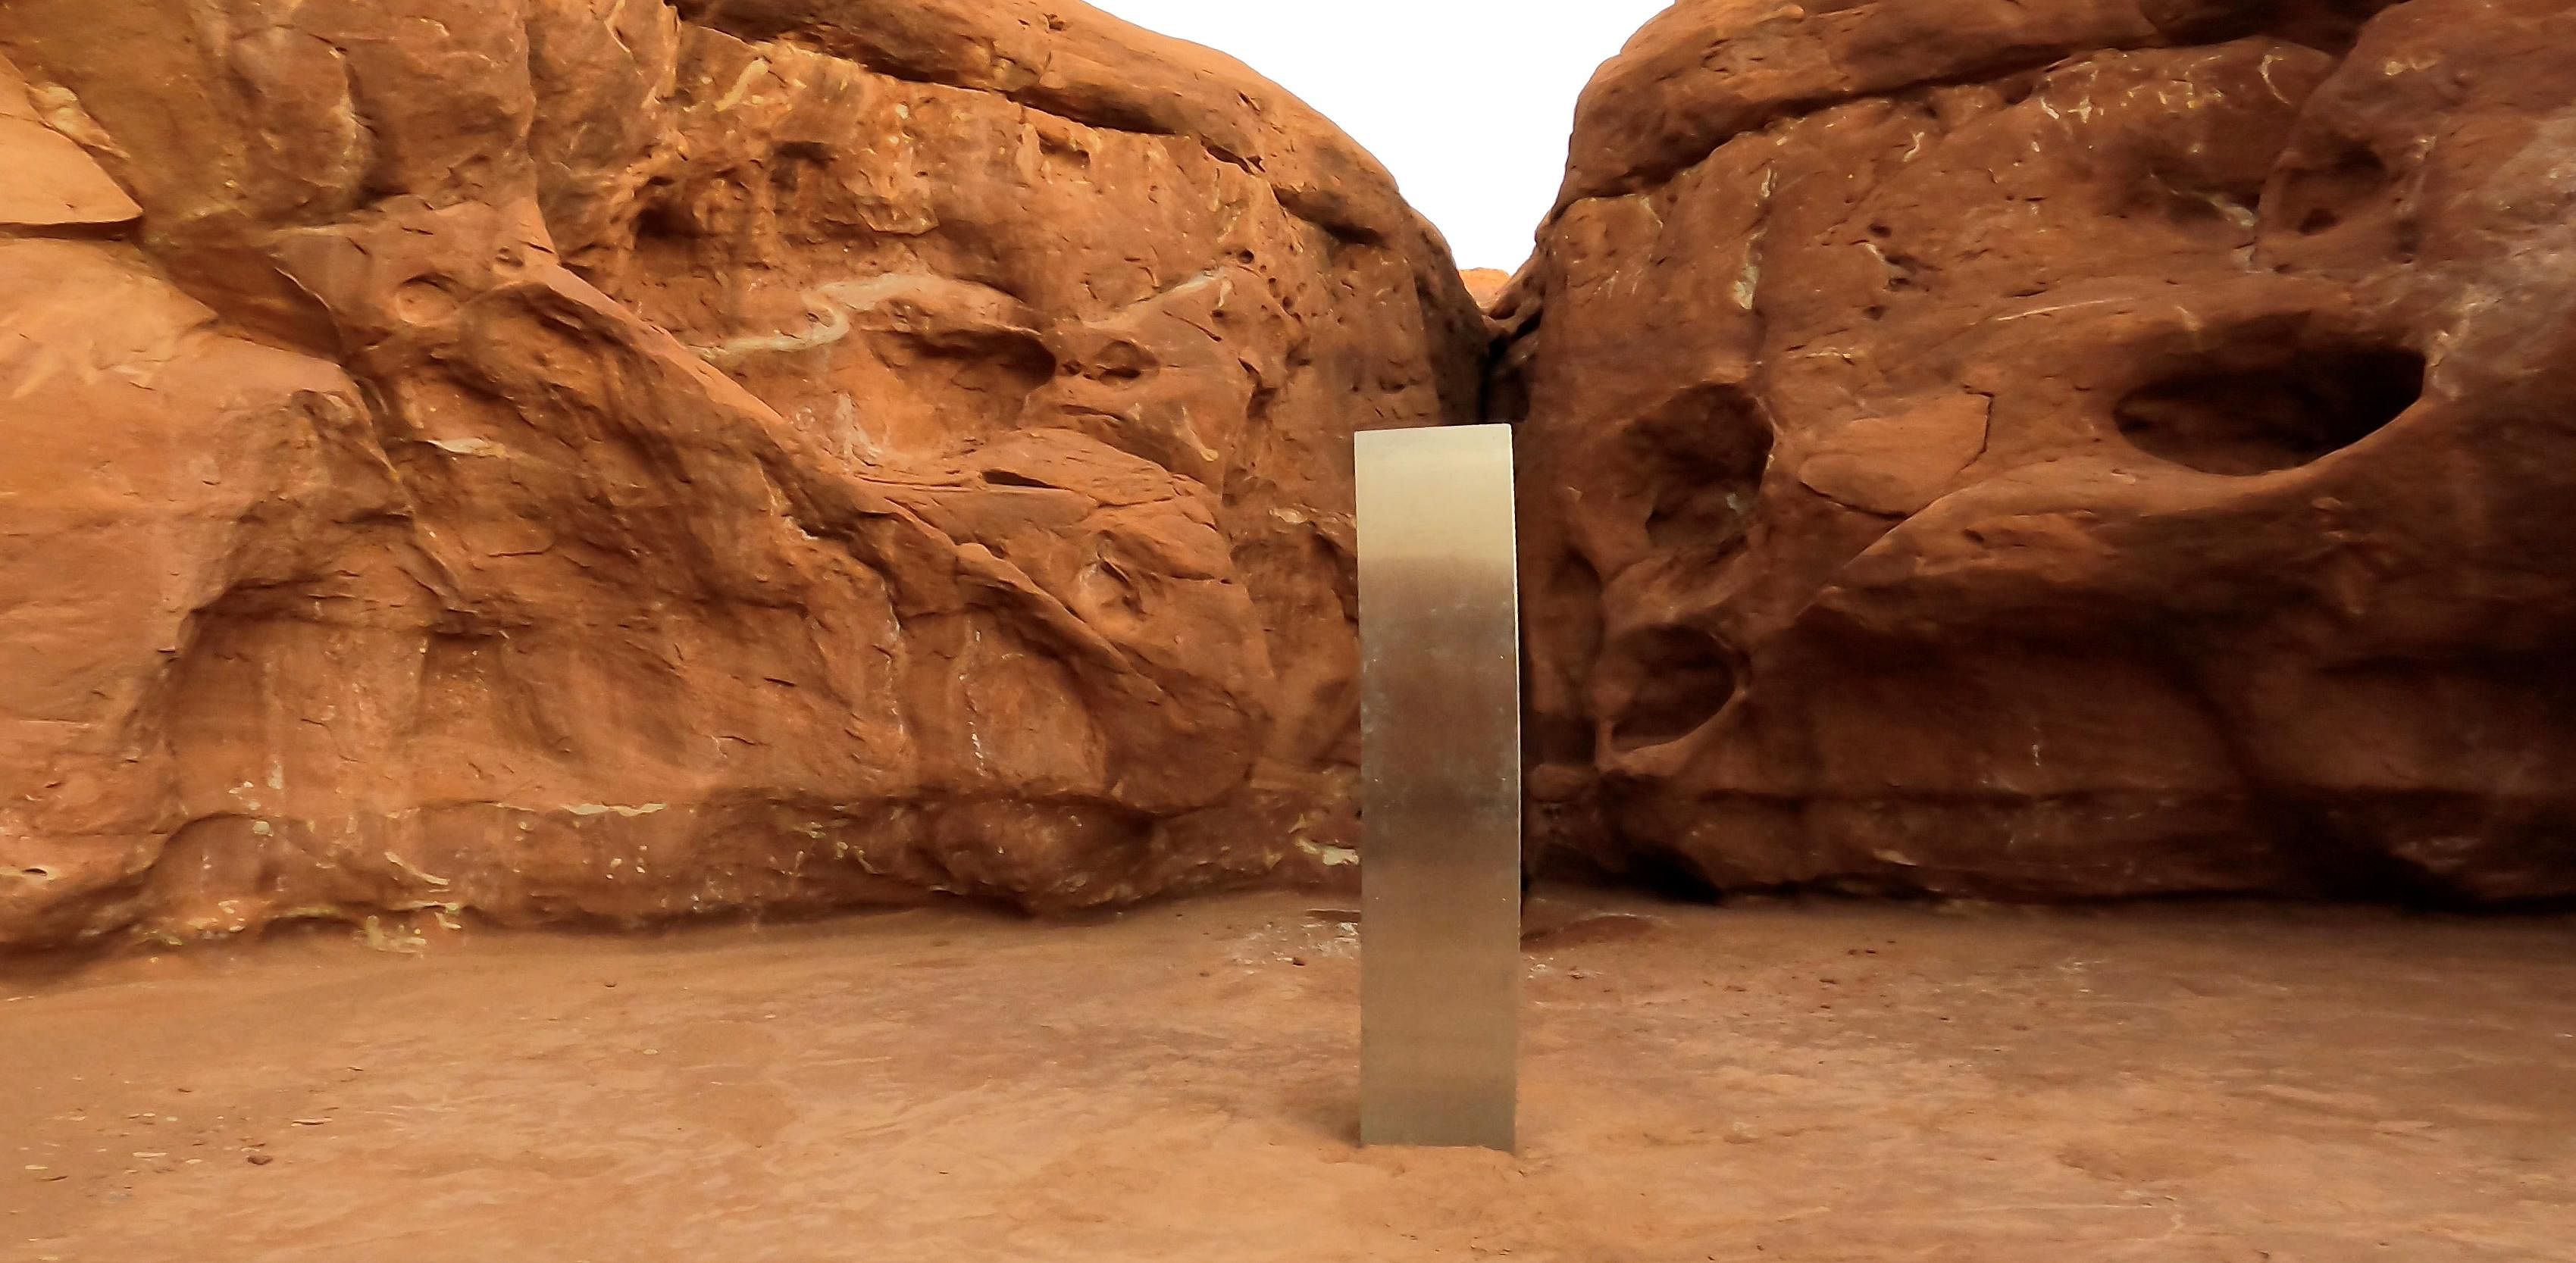 The pop-up metal monolith that became the focus of international attention after it was spotted in a remote section of the Utah desert on Nov. 18 was dismantled just 10 days later.  Credit: Reuters